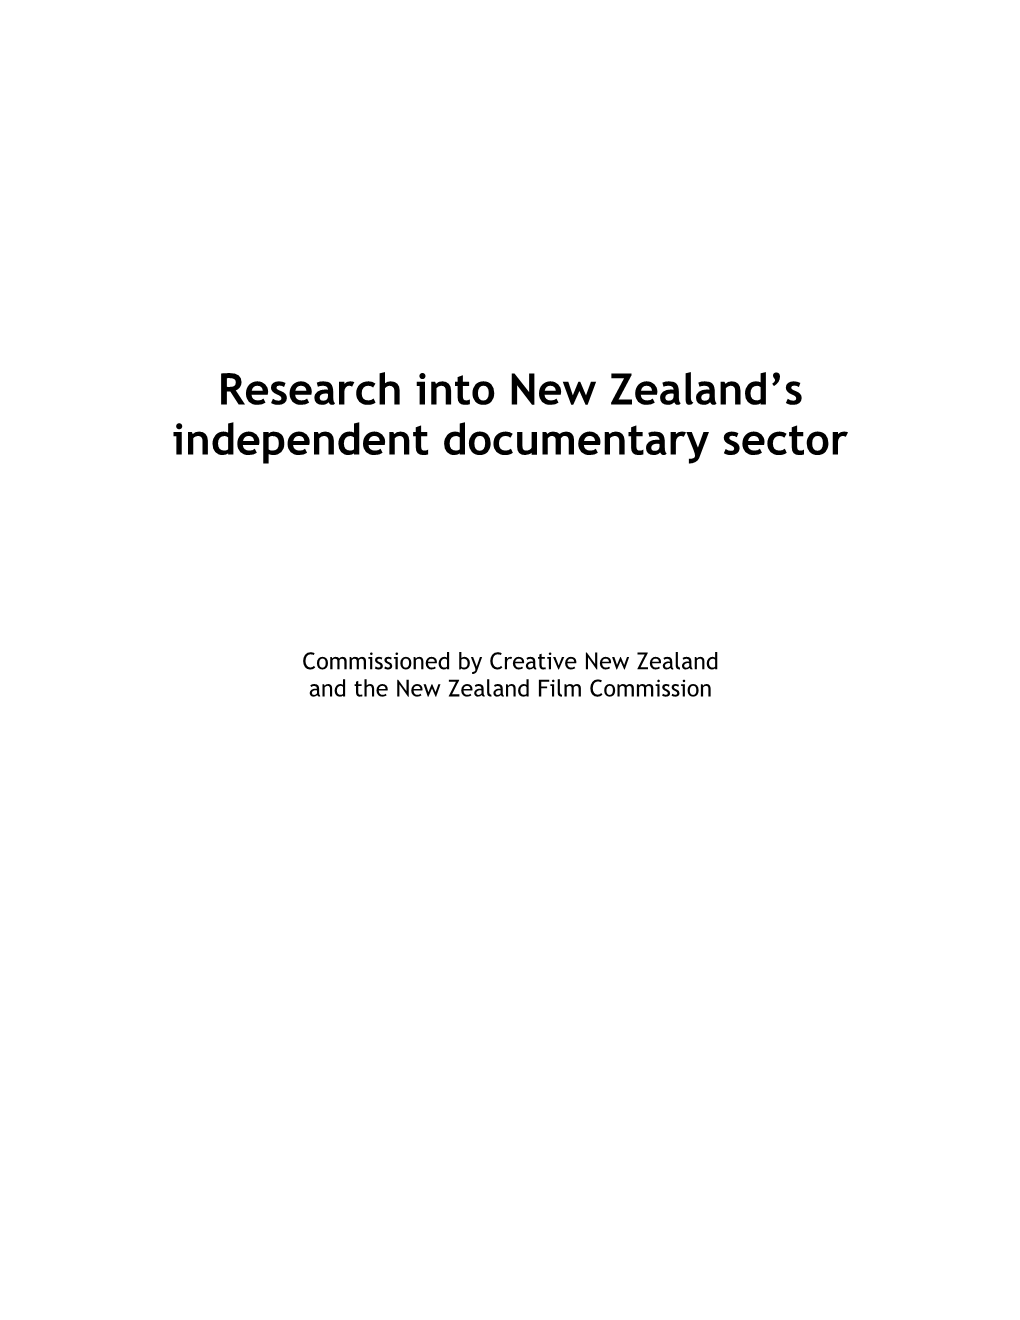 Research Into New Zealand's Independent Documentary Sector